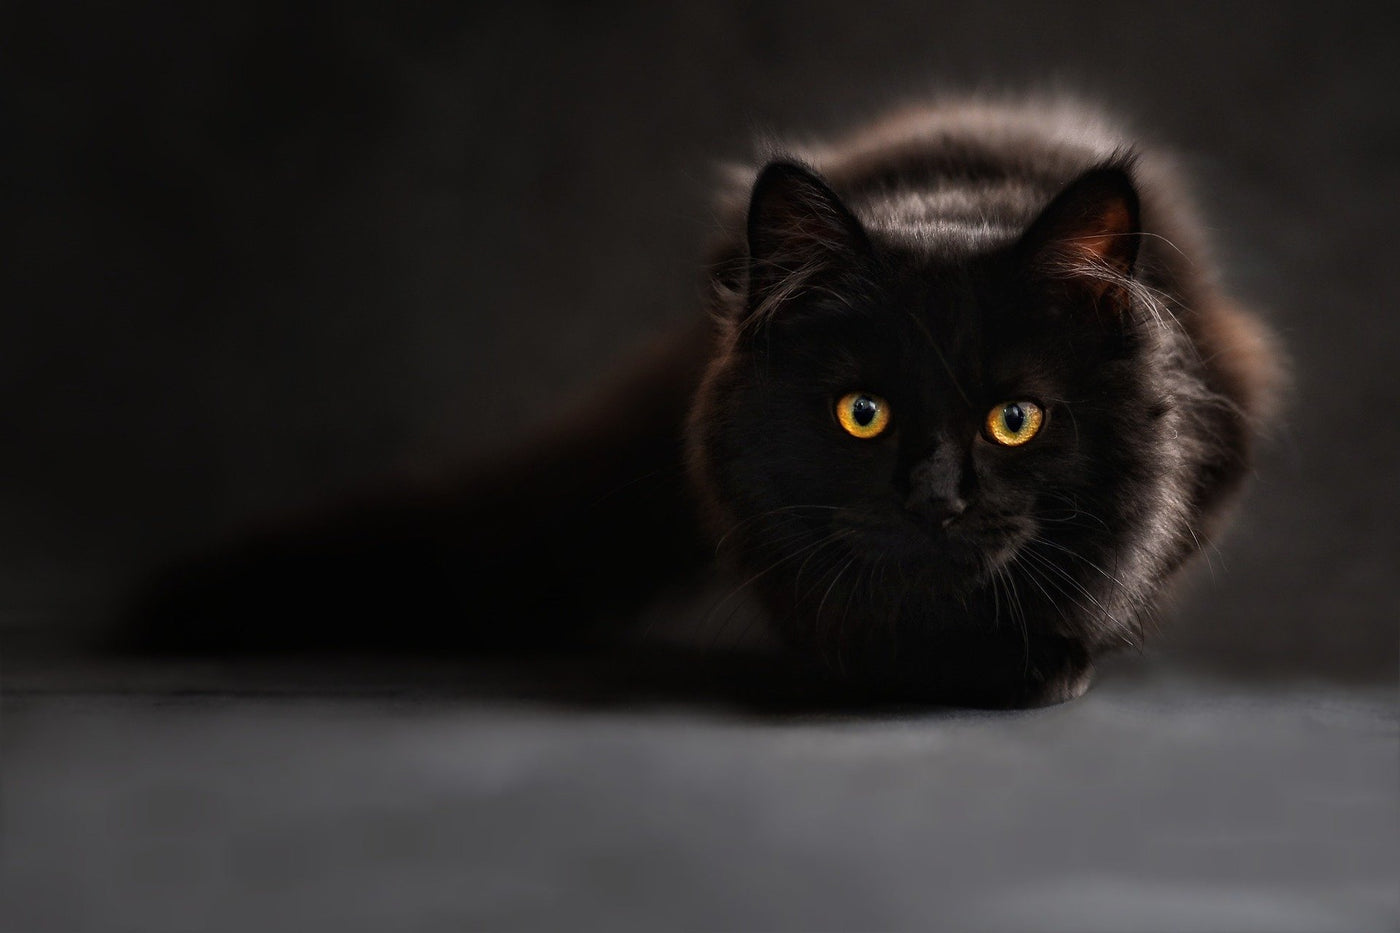 Hair-raising facts (and myths) about our favorite black-furred creatures